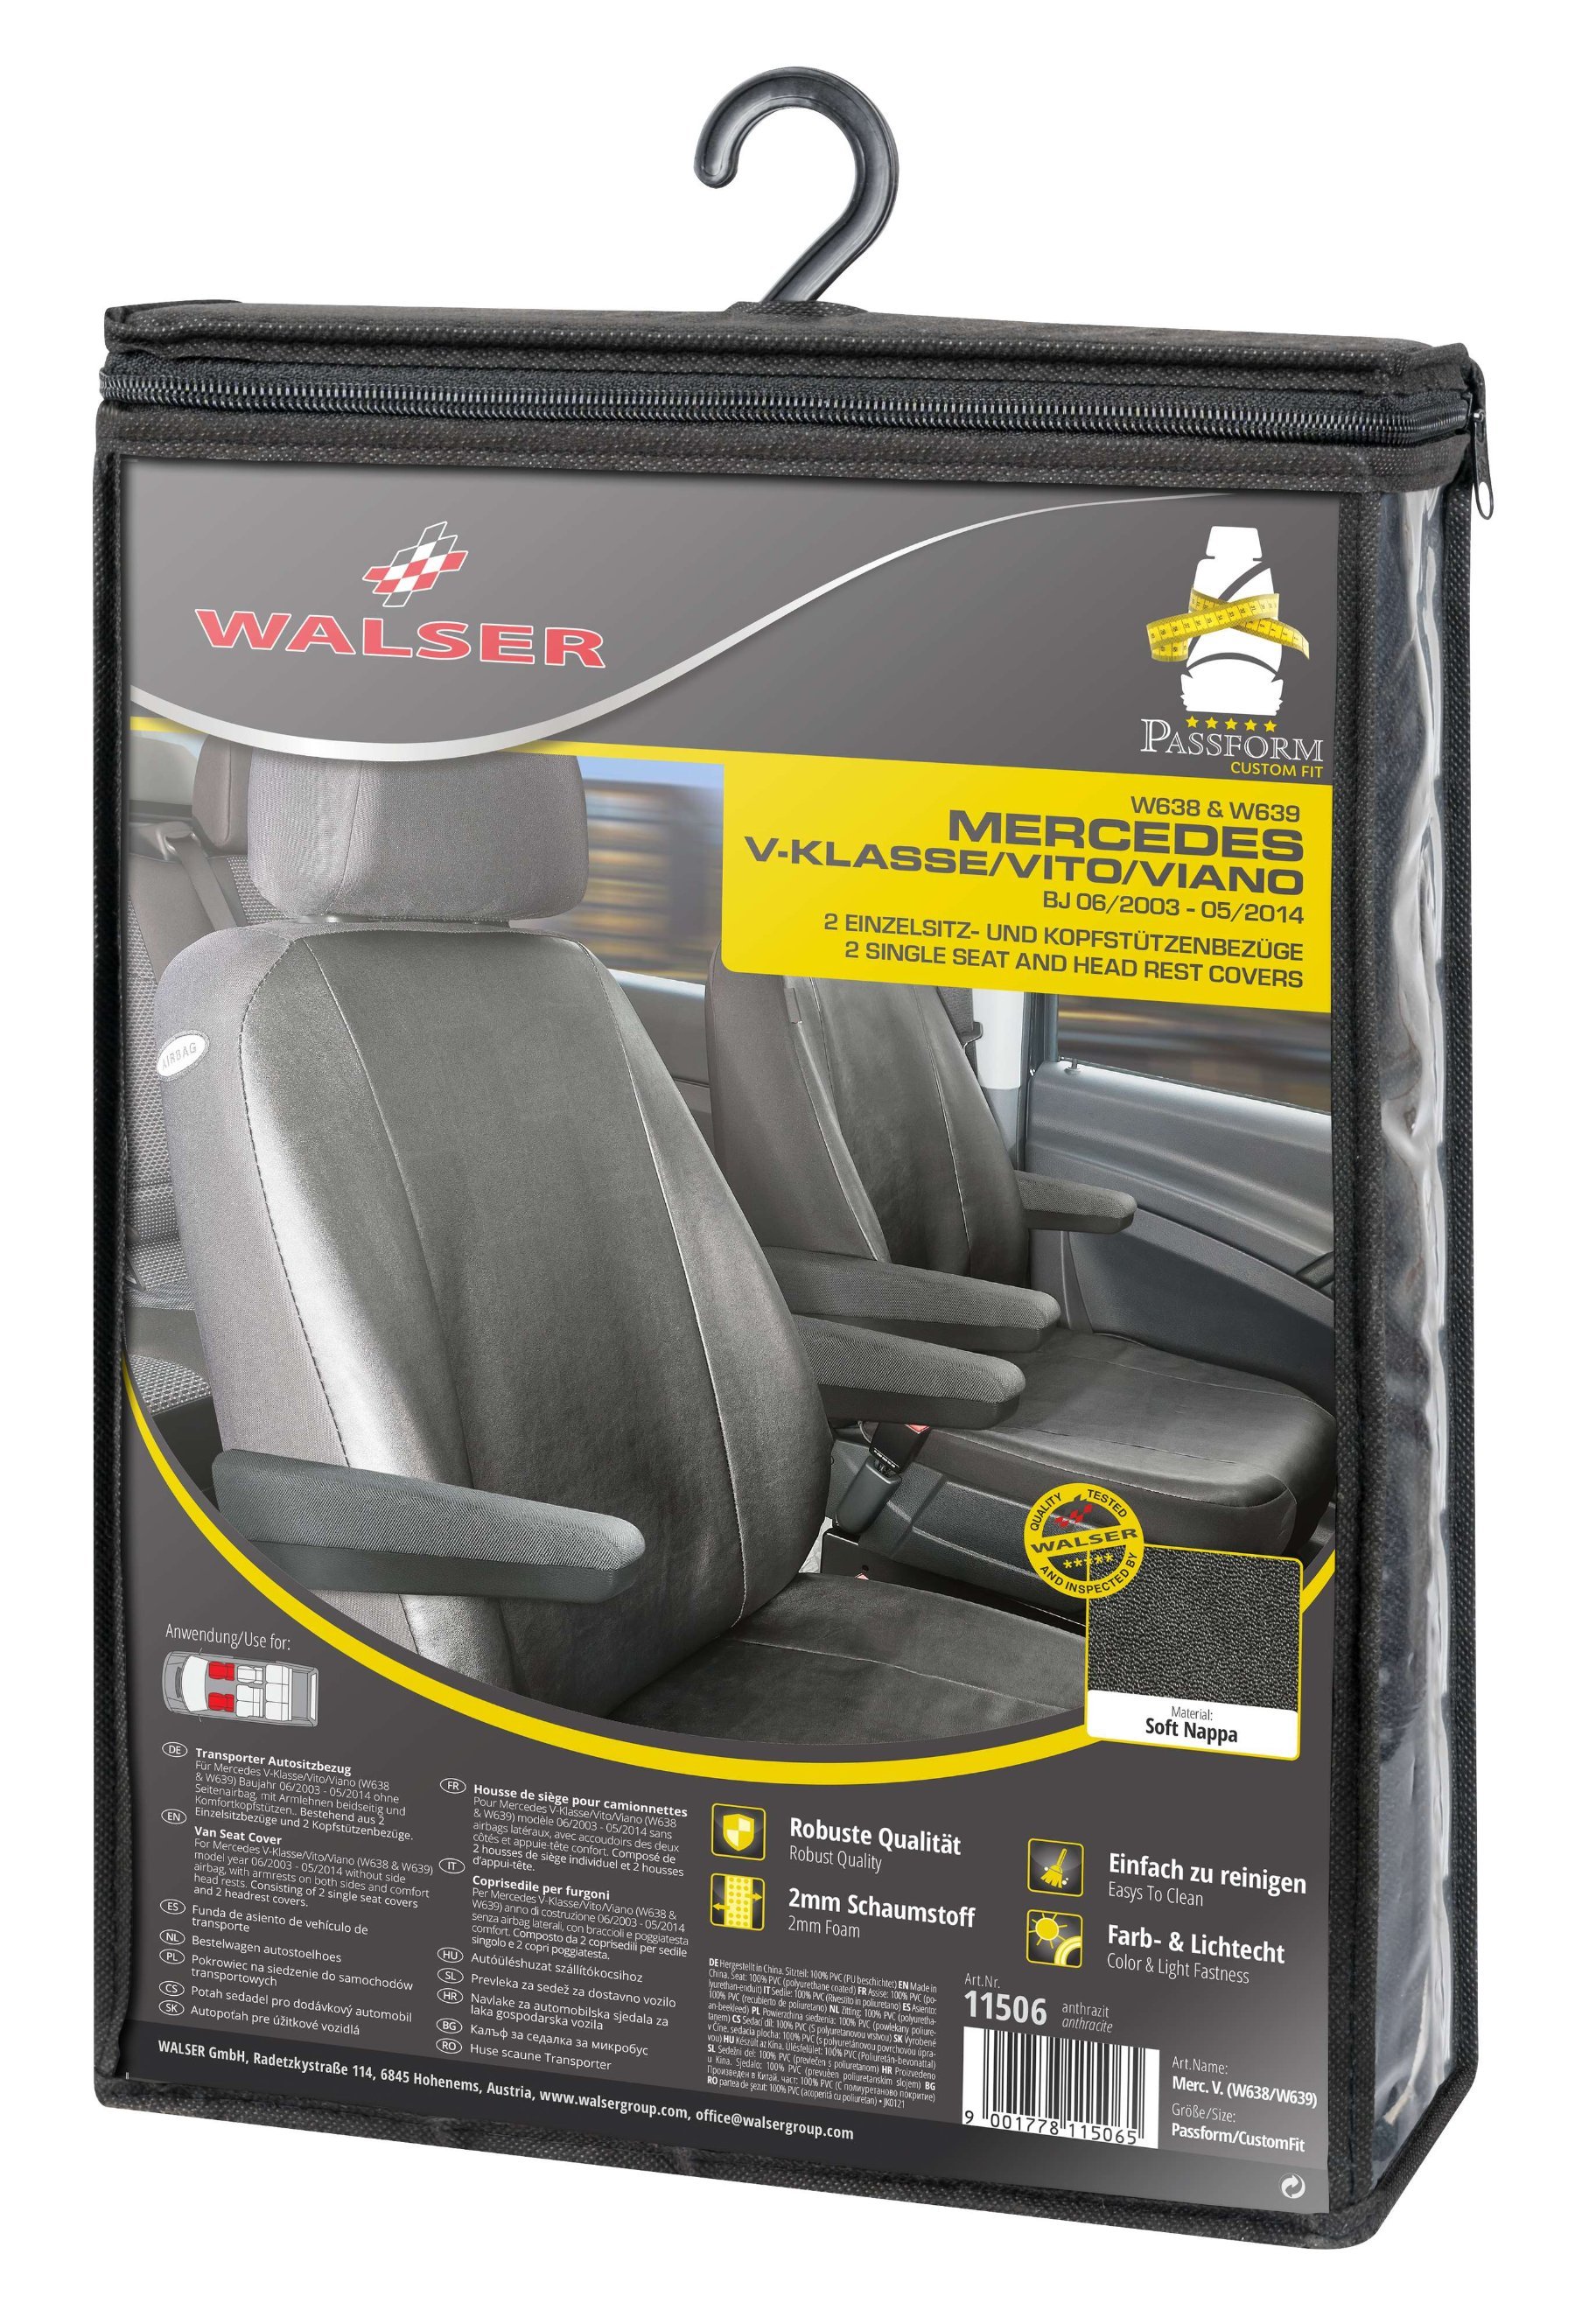 Seat cover made of imitation leather for Mercedes-Benz Viano/Vito, 2 single seat covers with armrest inside + outside